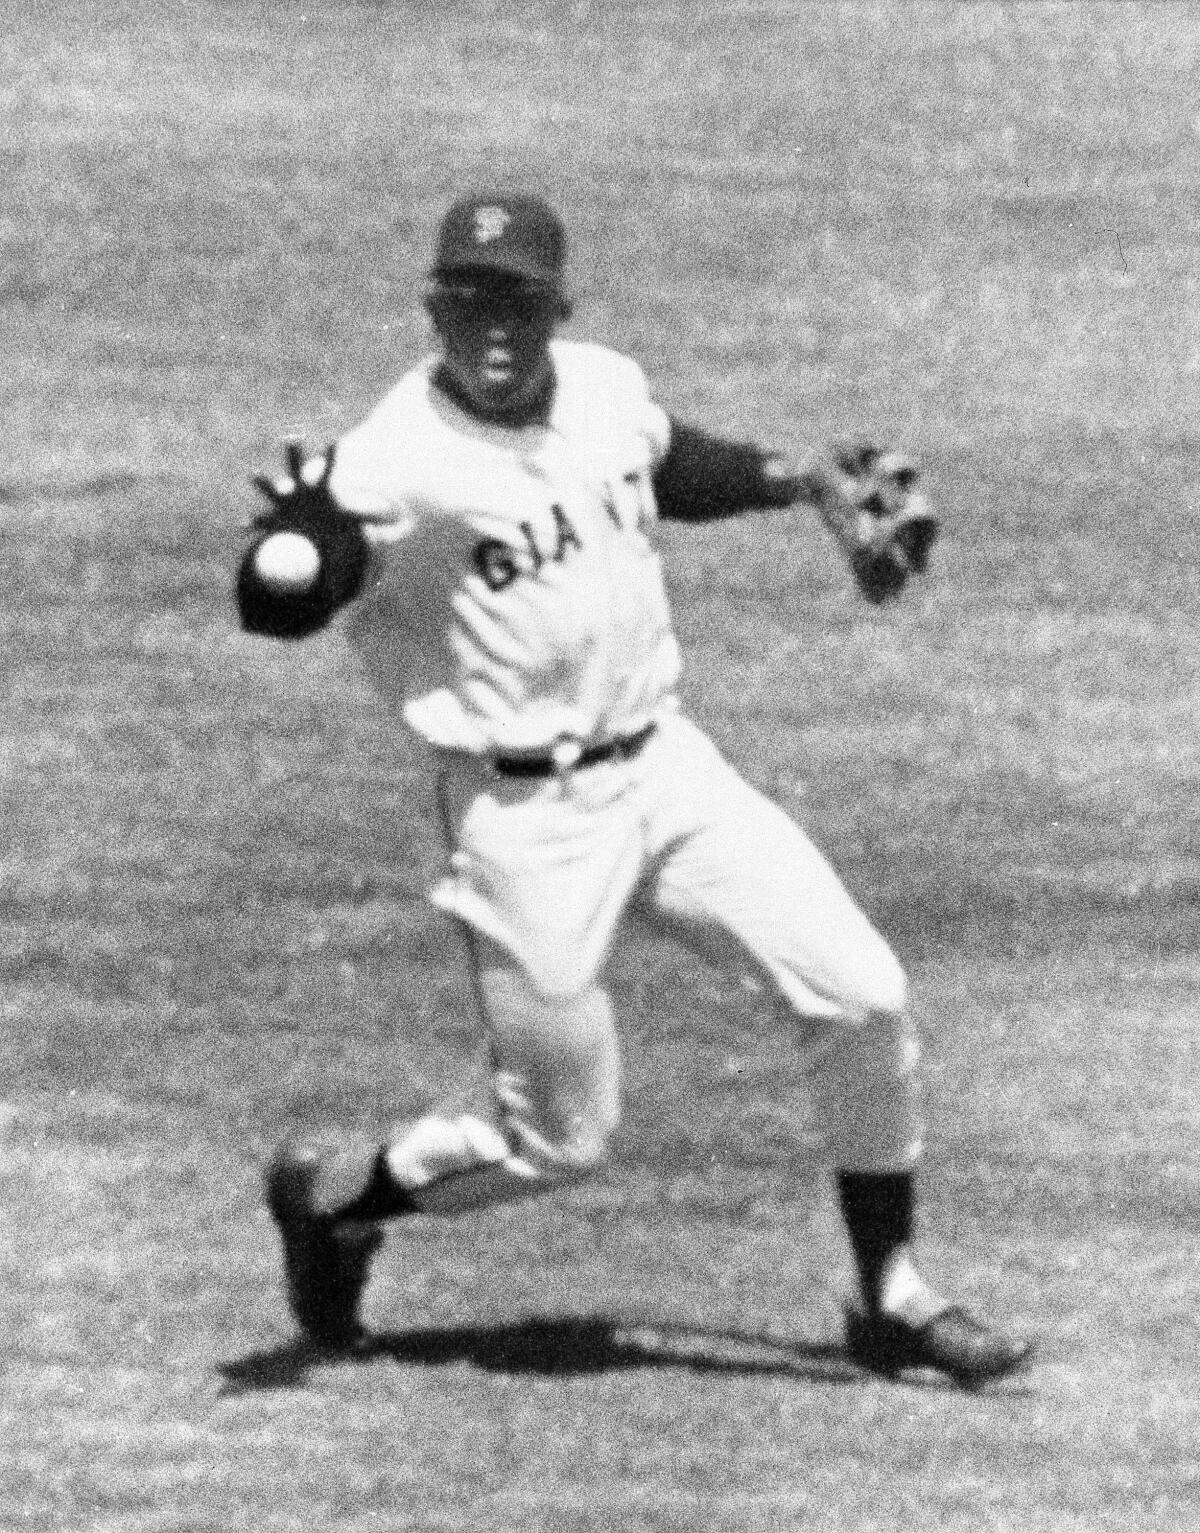 Willie Mays' best stats and accomplishments